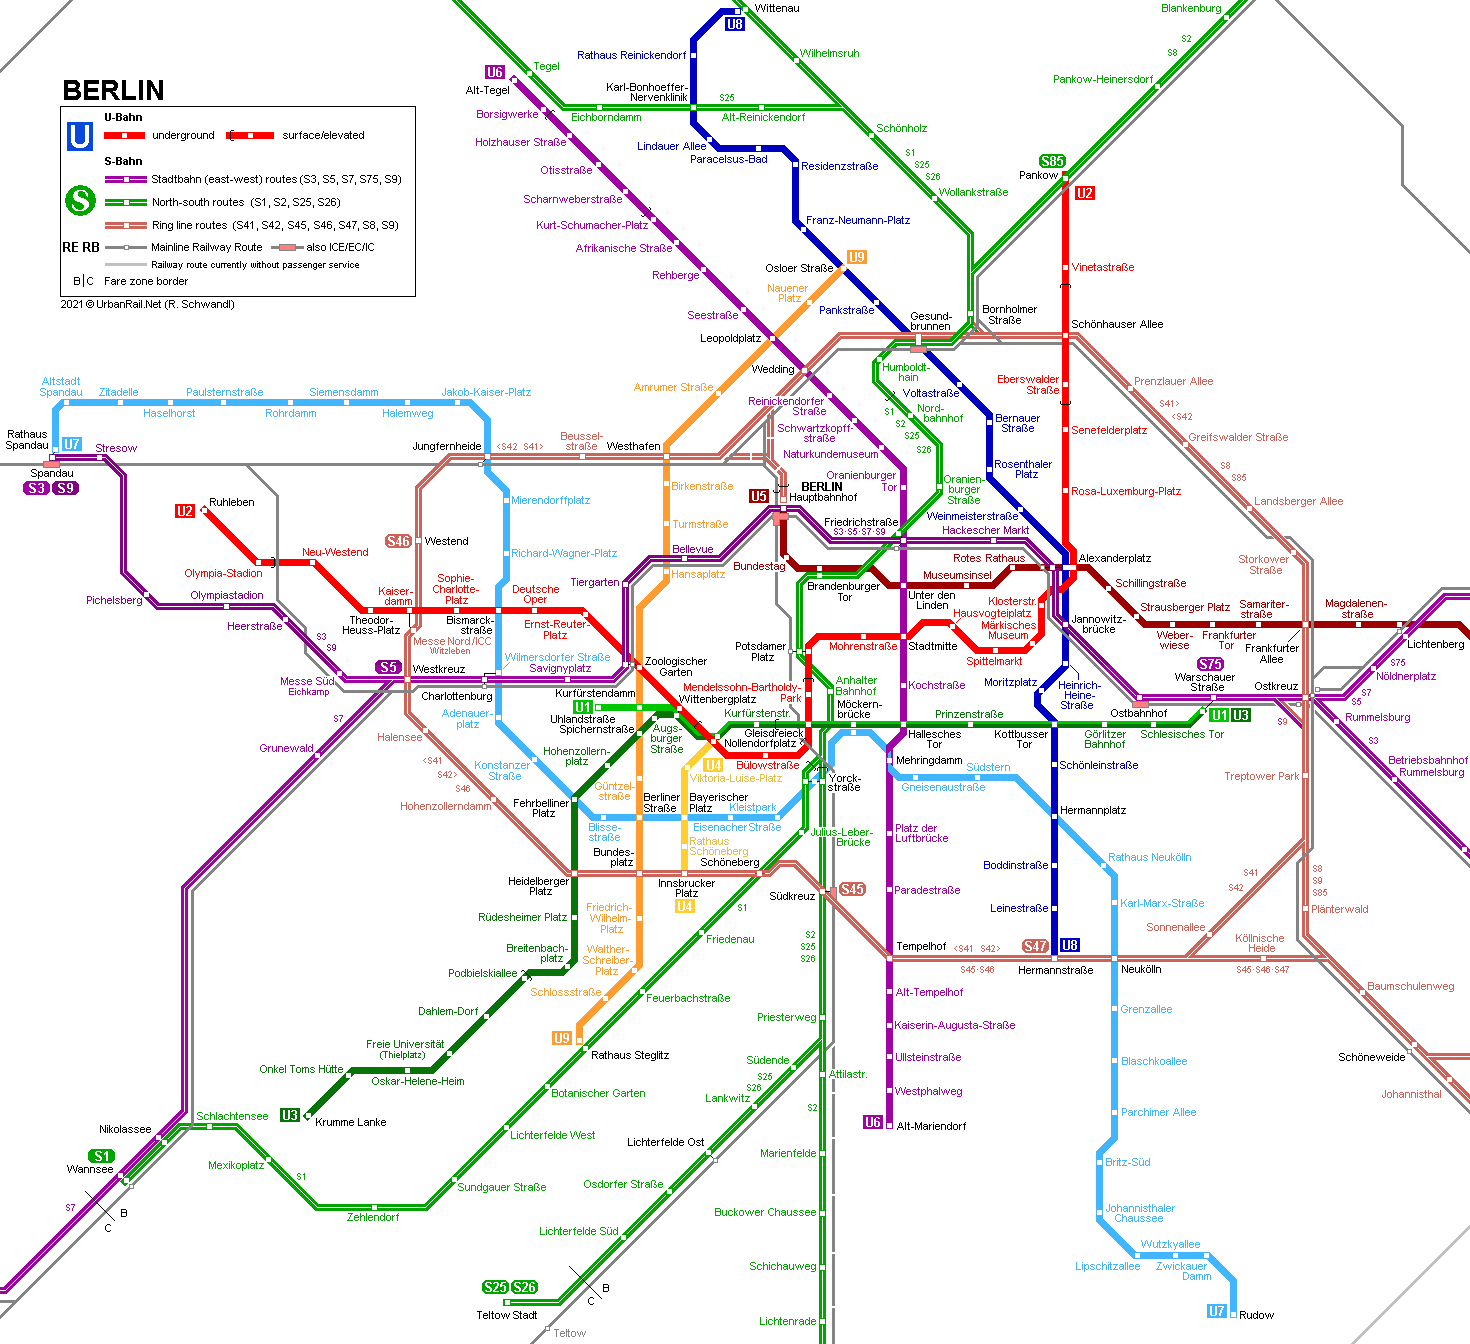 Berlin U-Bahn and S-Bahn Network - Click to expand!